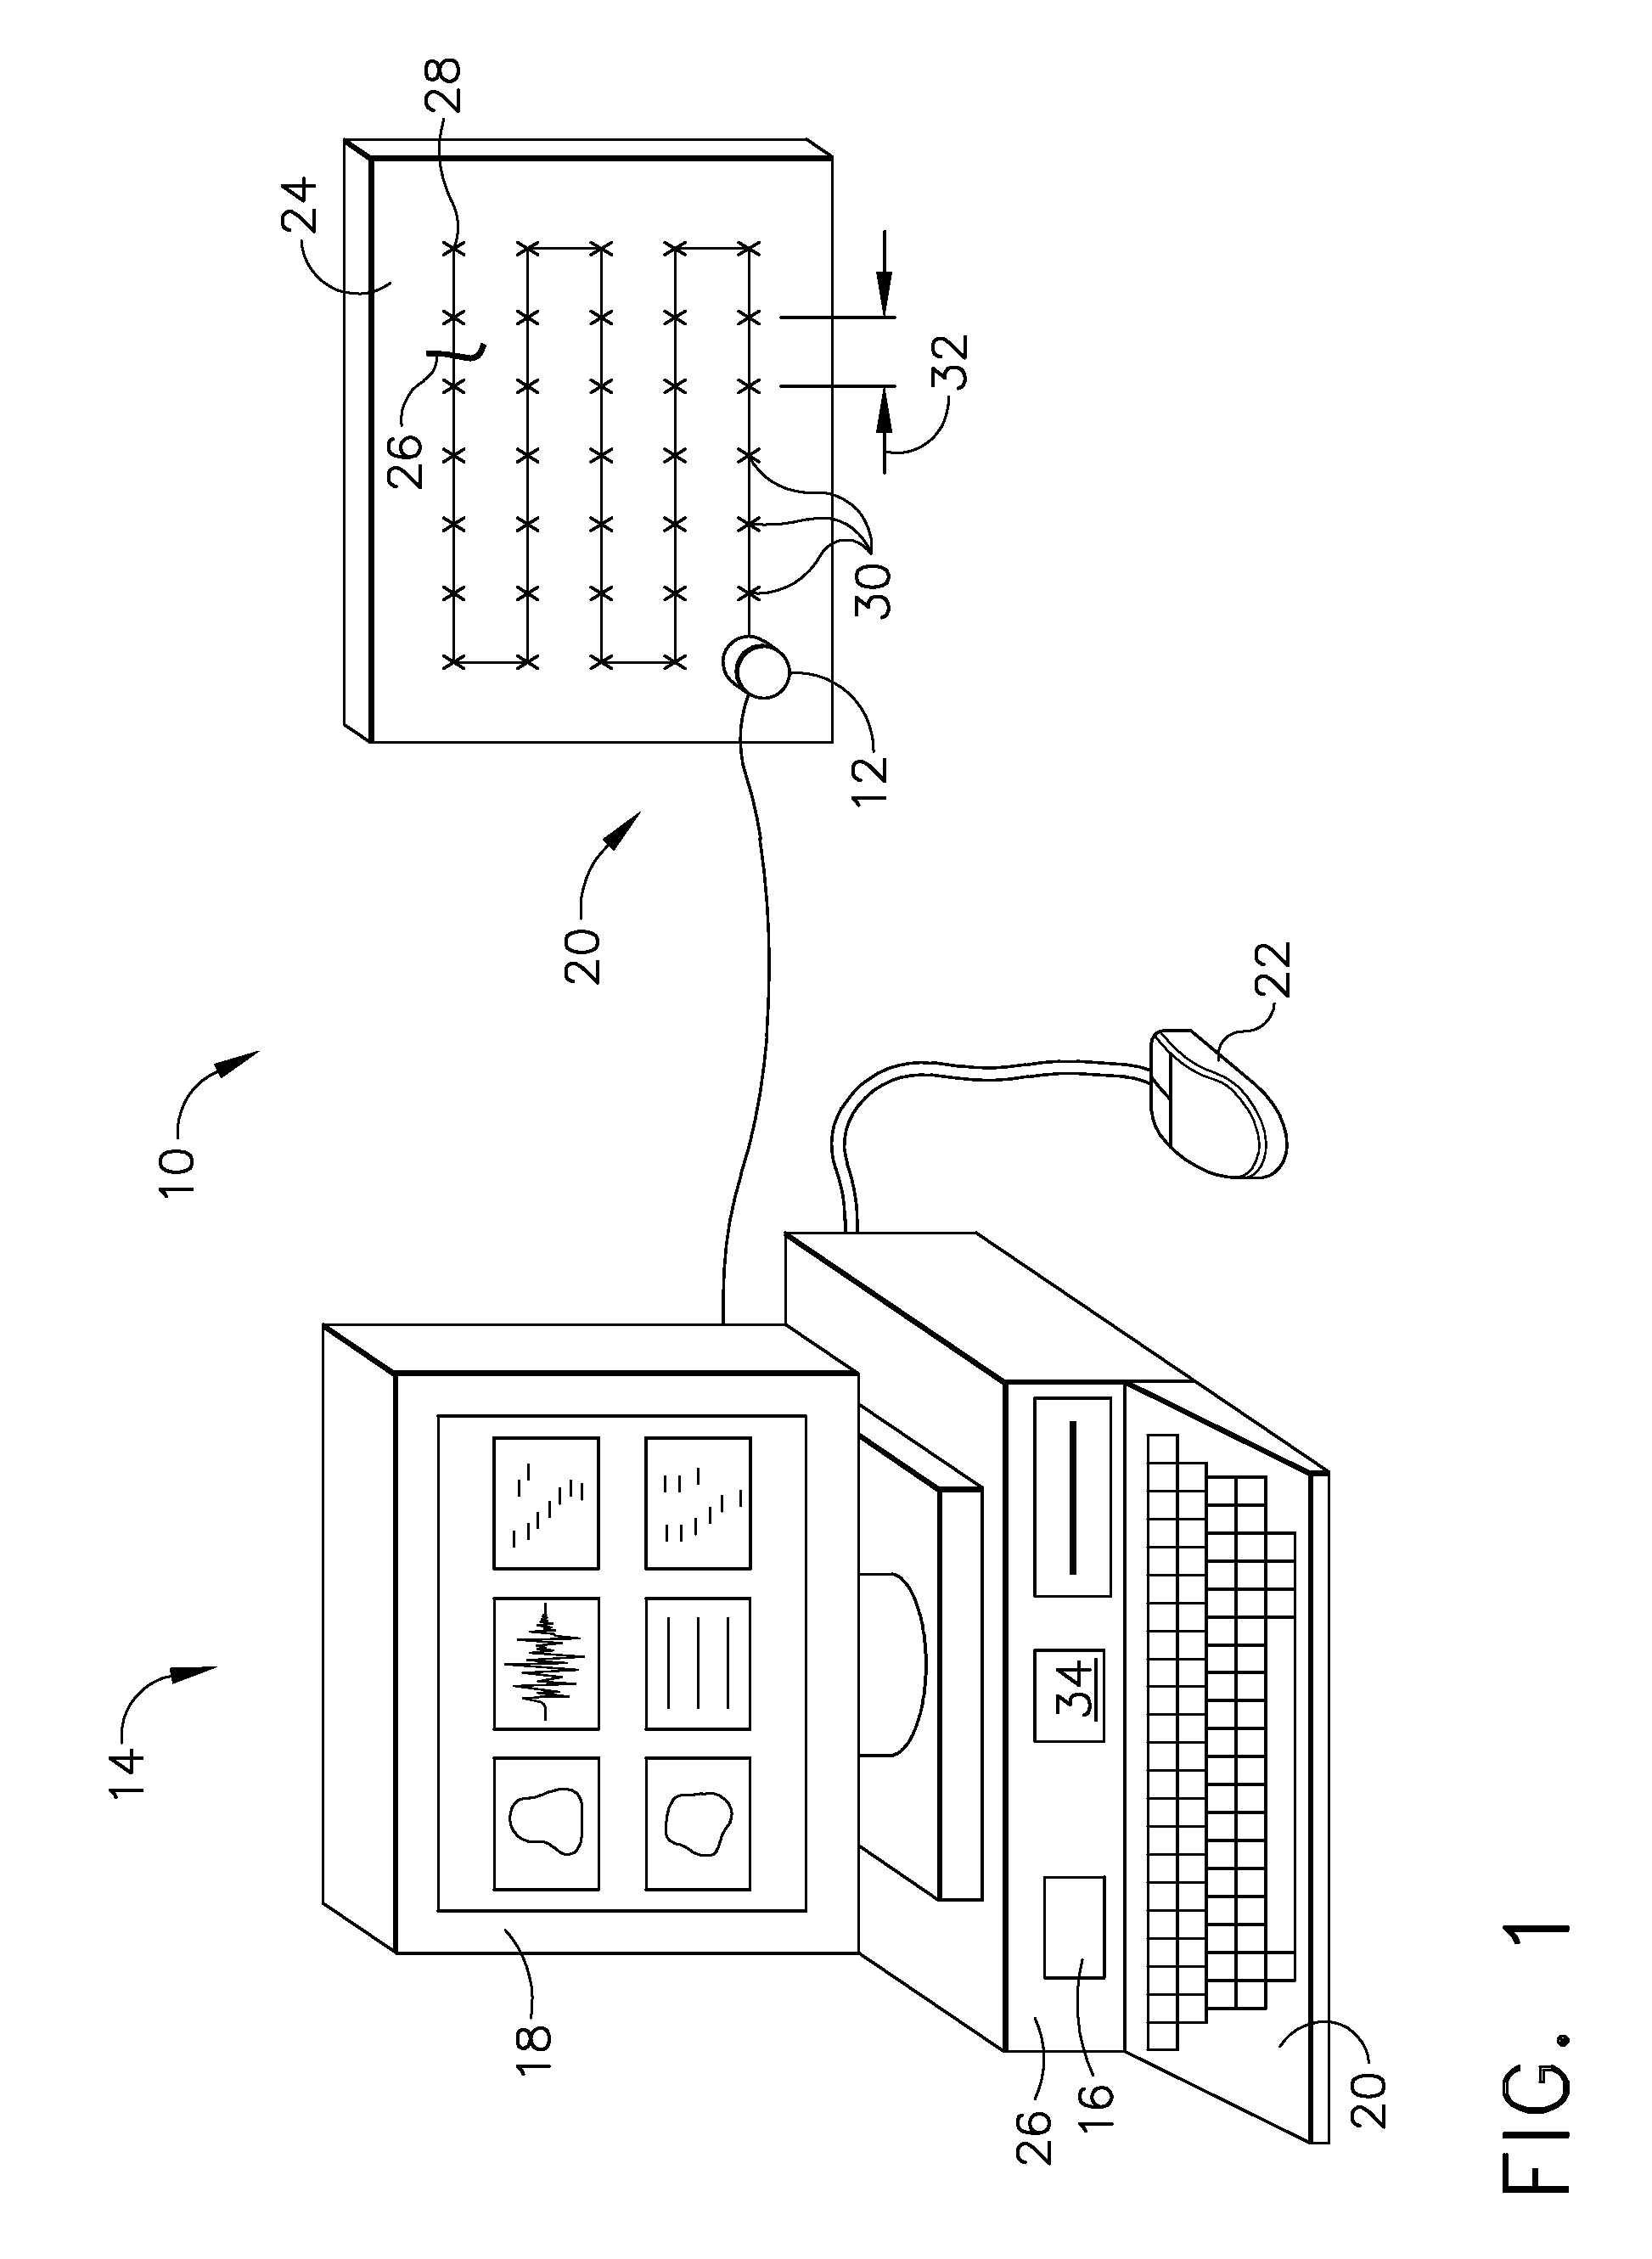 Method and apparatus for inspecting components